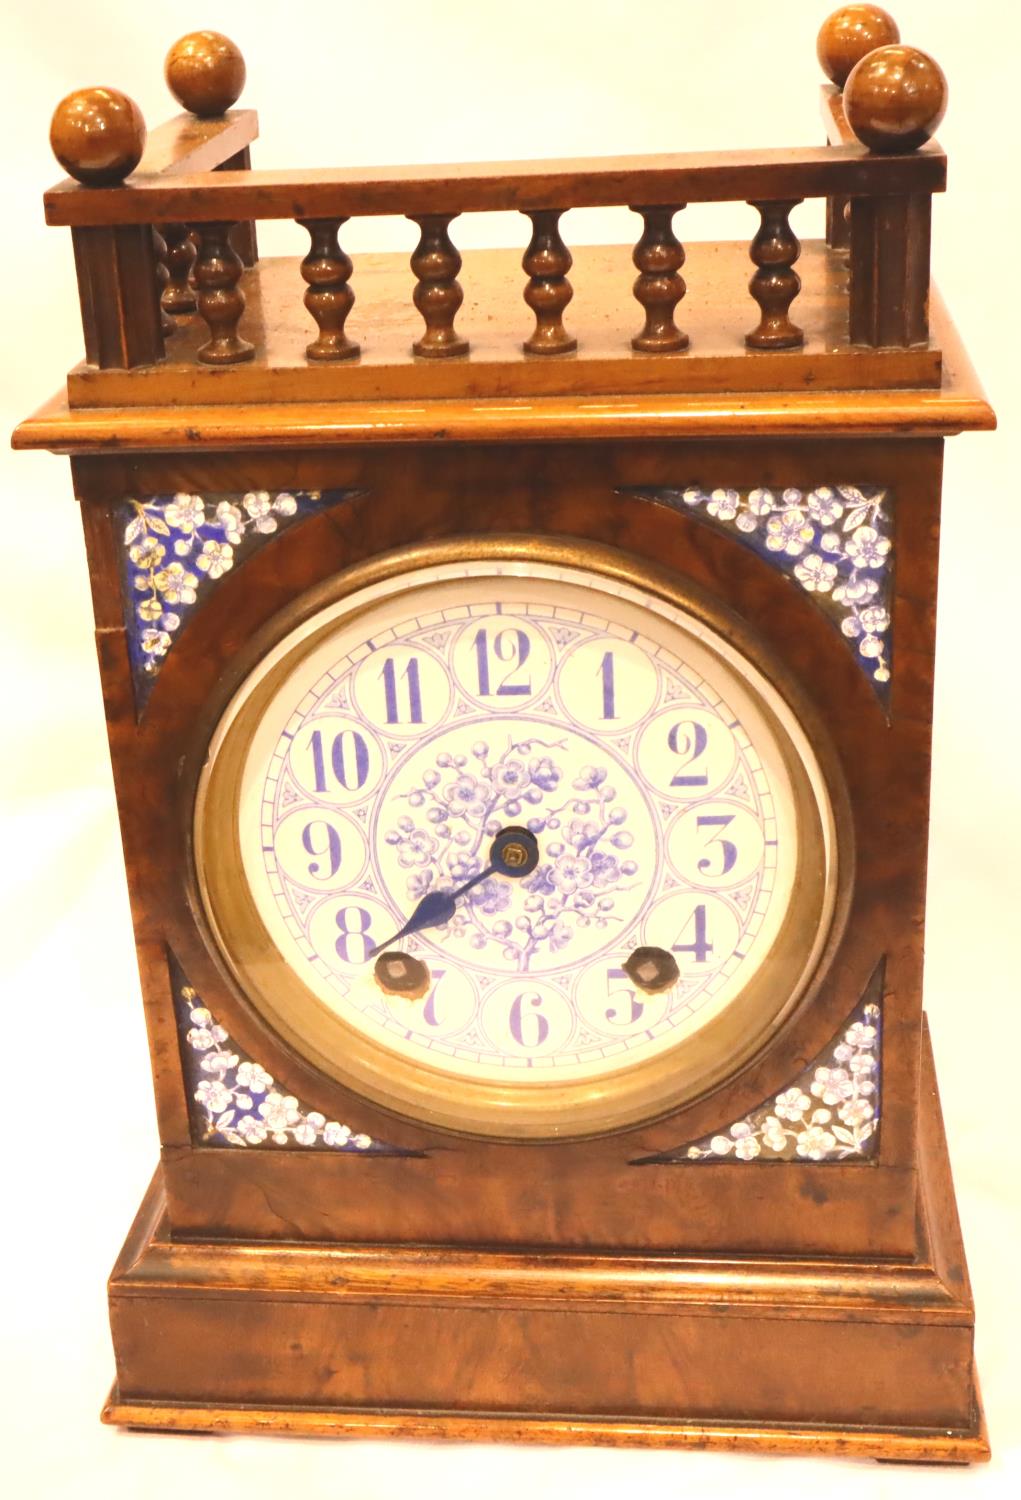 An Edwardian walnut cased mantel clock with enamelled circular dial, chiming on a gong, H: 32 cm.